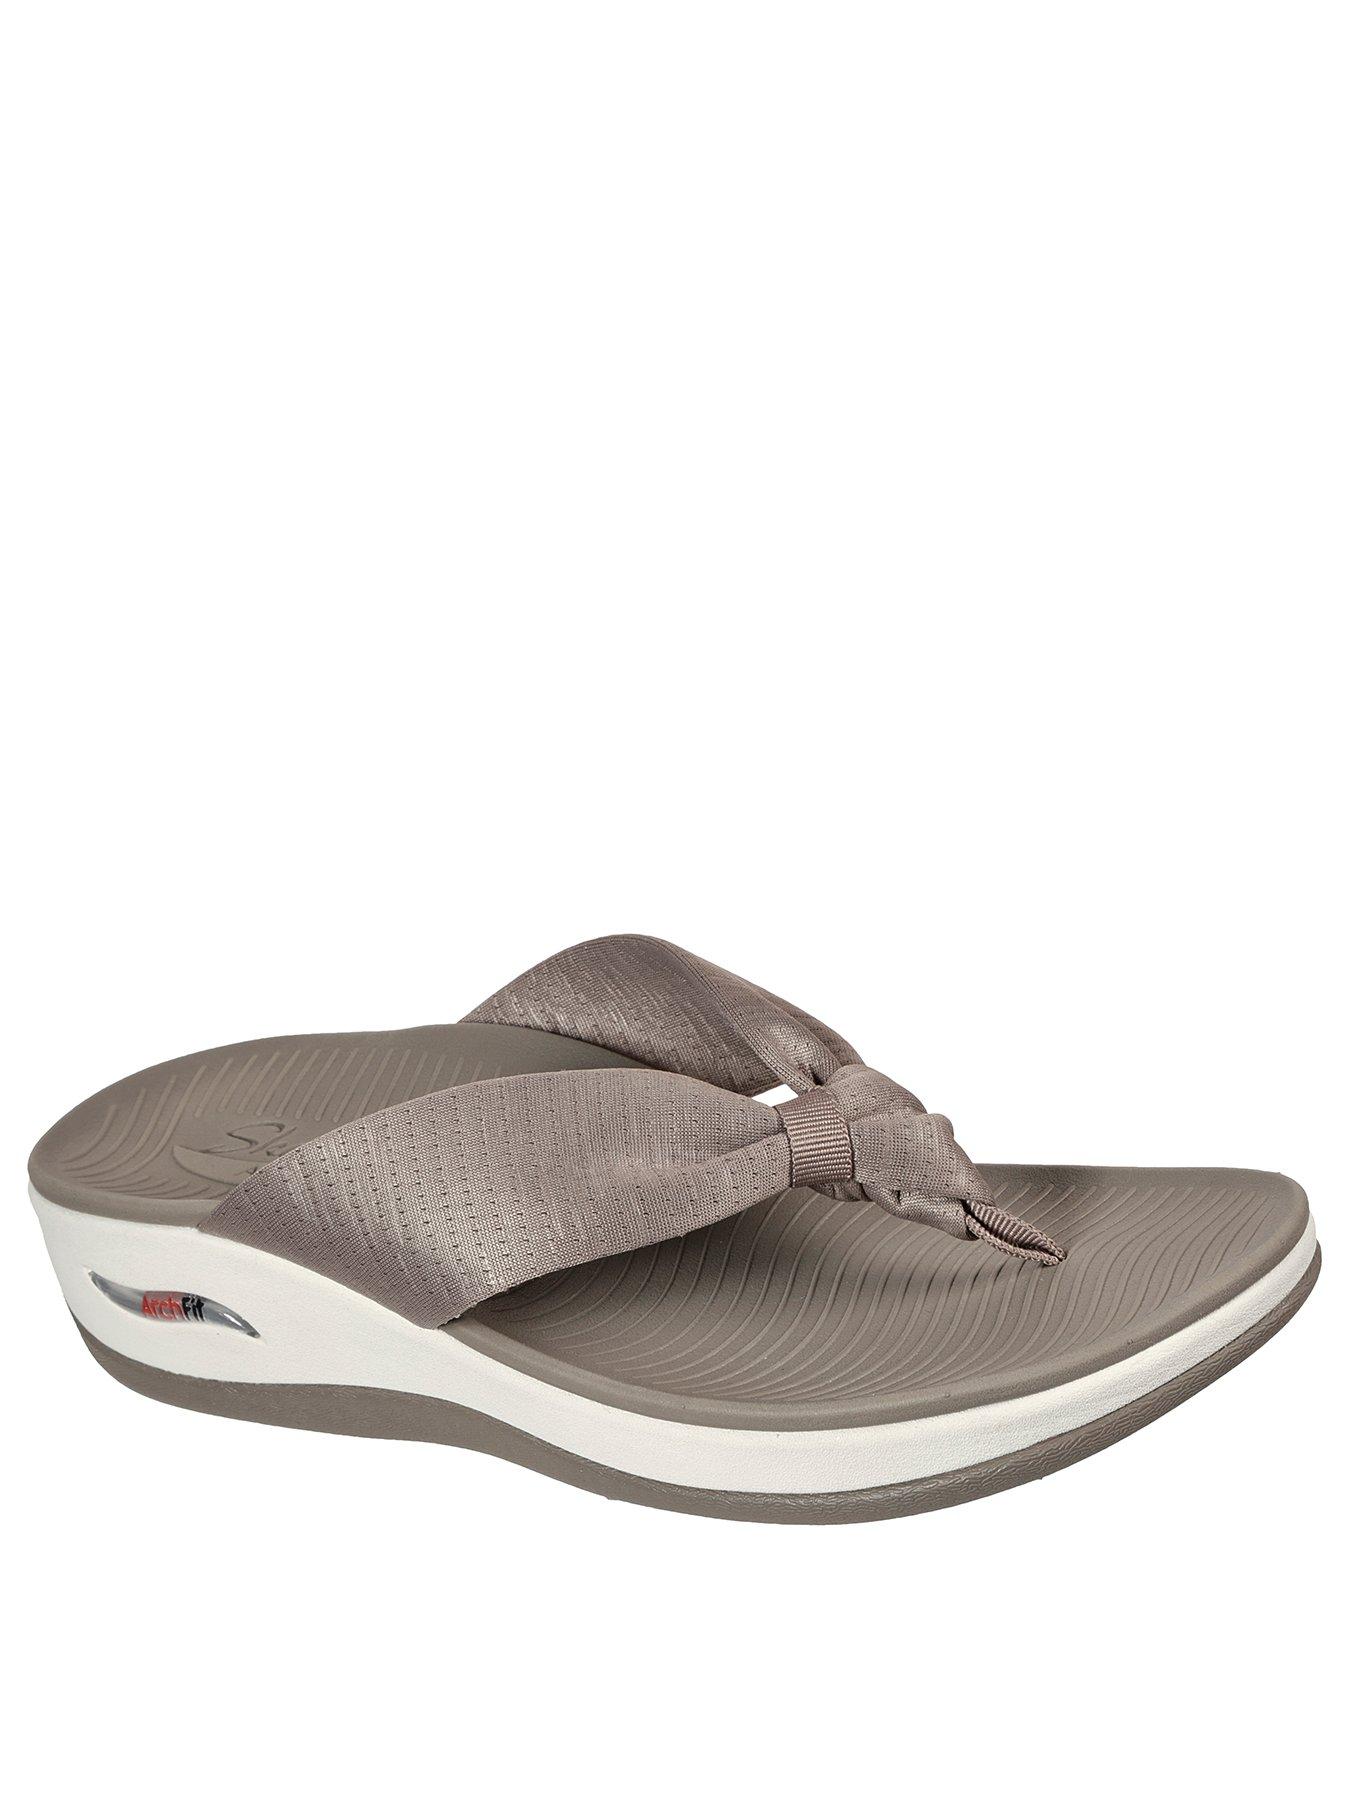 Skechers Arch Fit Thong Wedge Sandals | very.co.uk